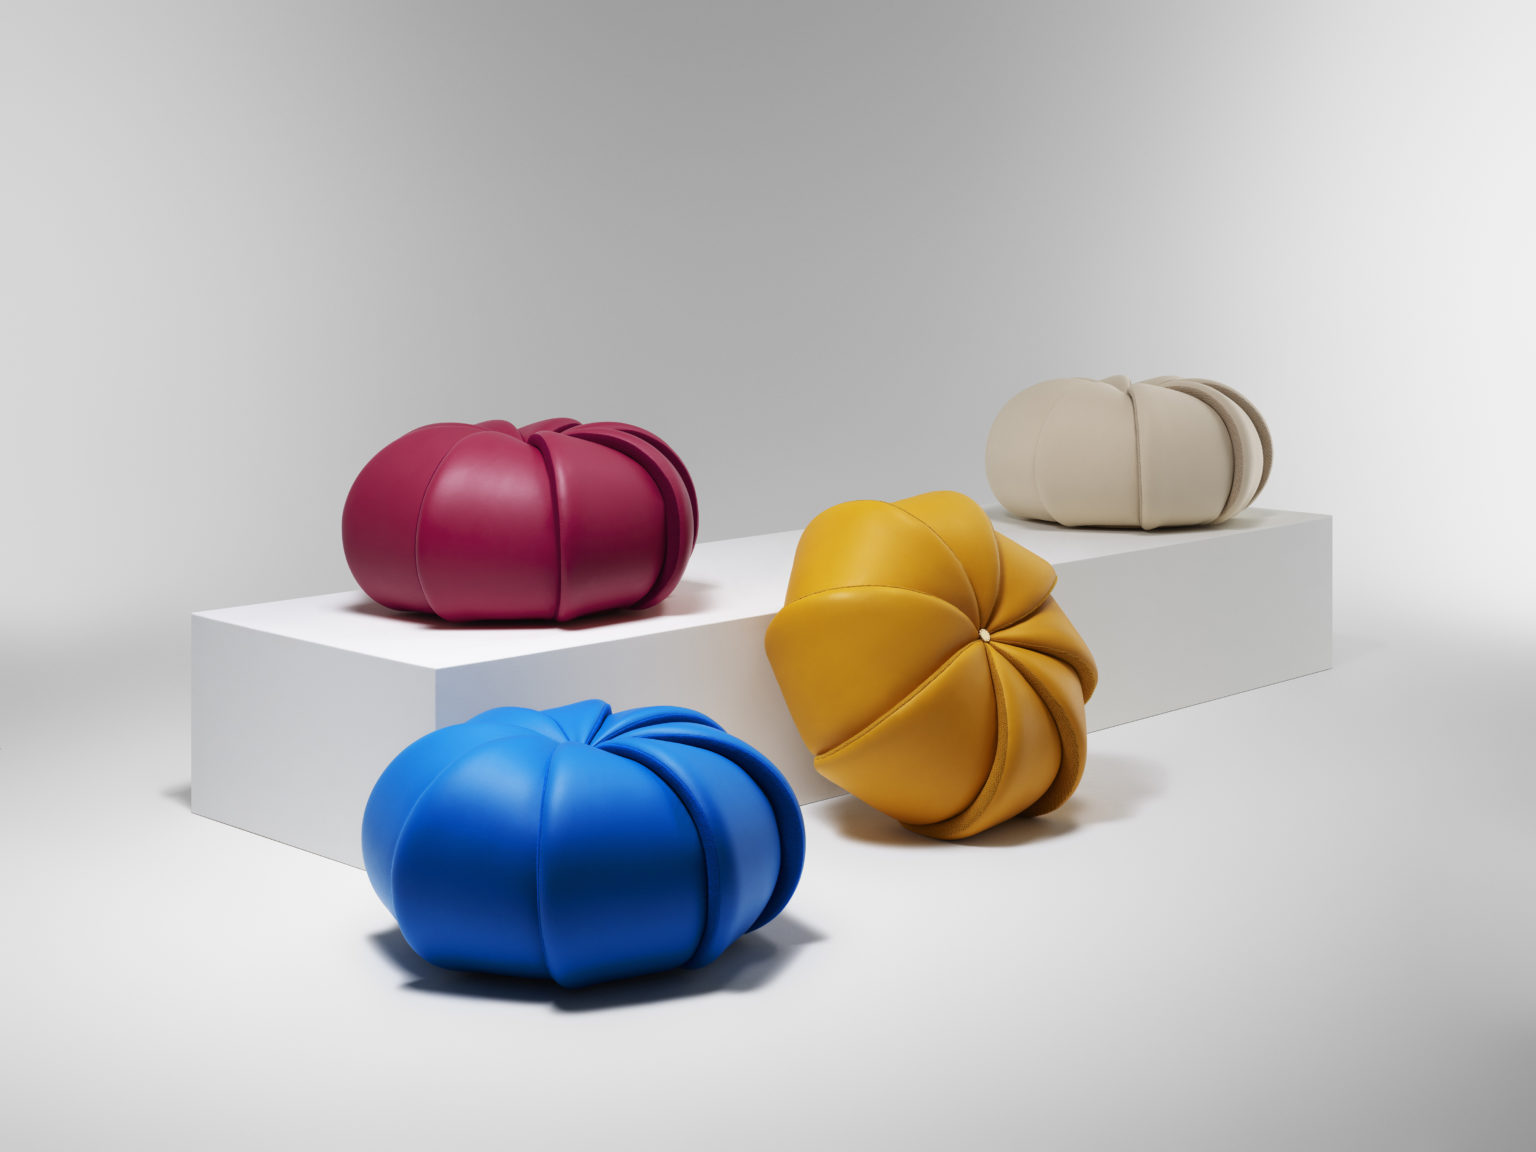 Louis Vuitton's Objets Nomades Collection - Suzanne Lovell Inc.